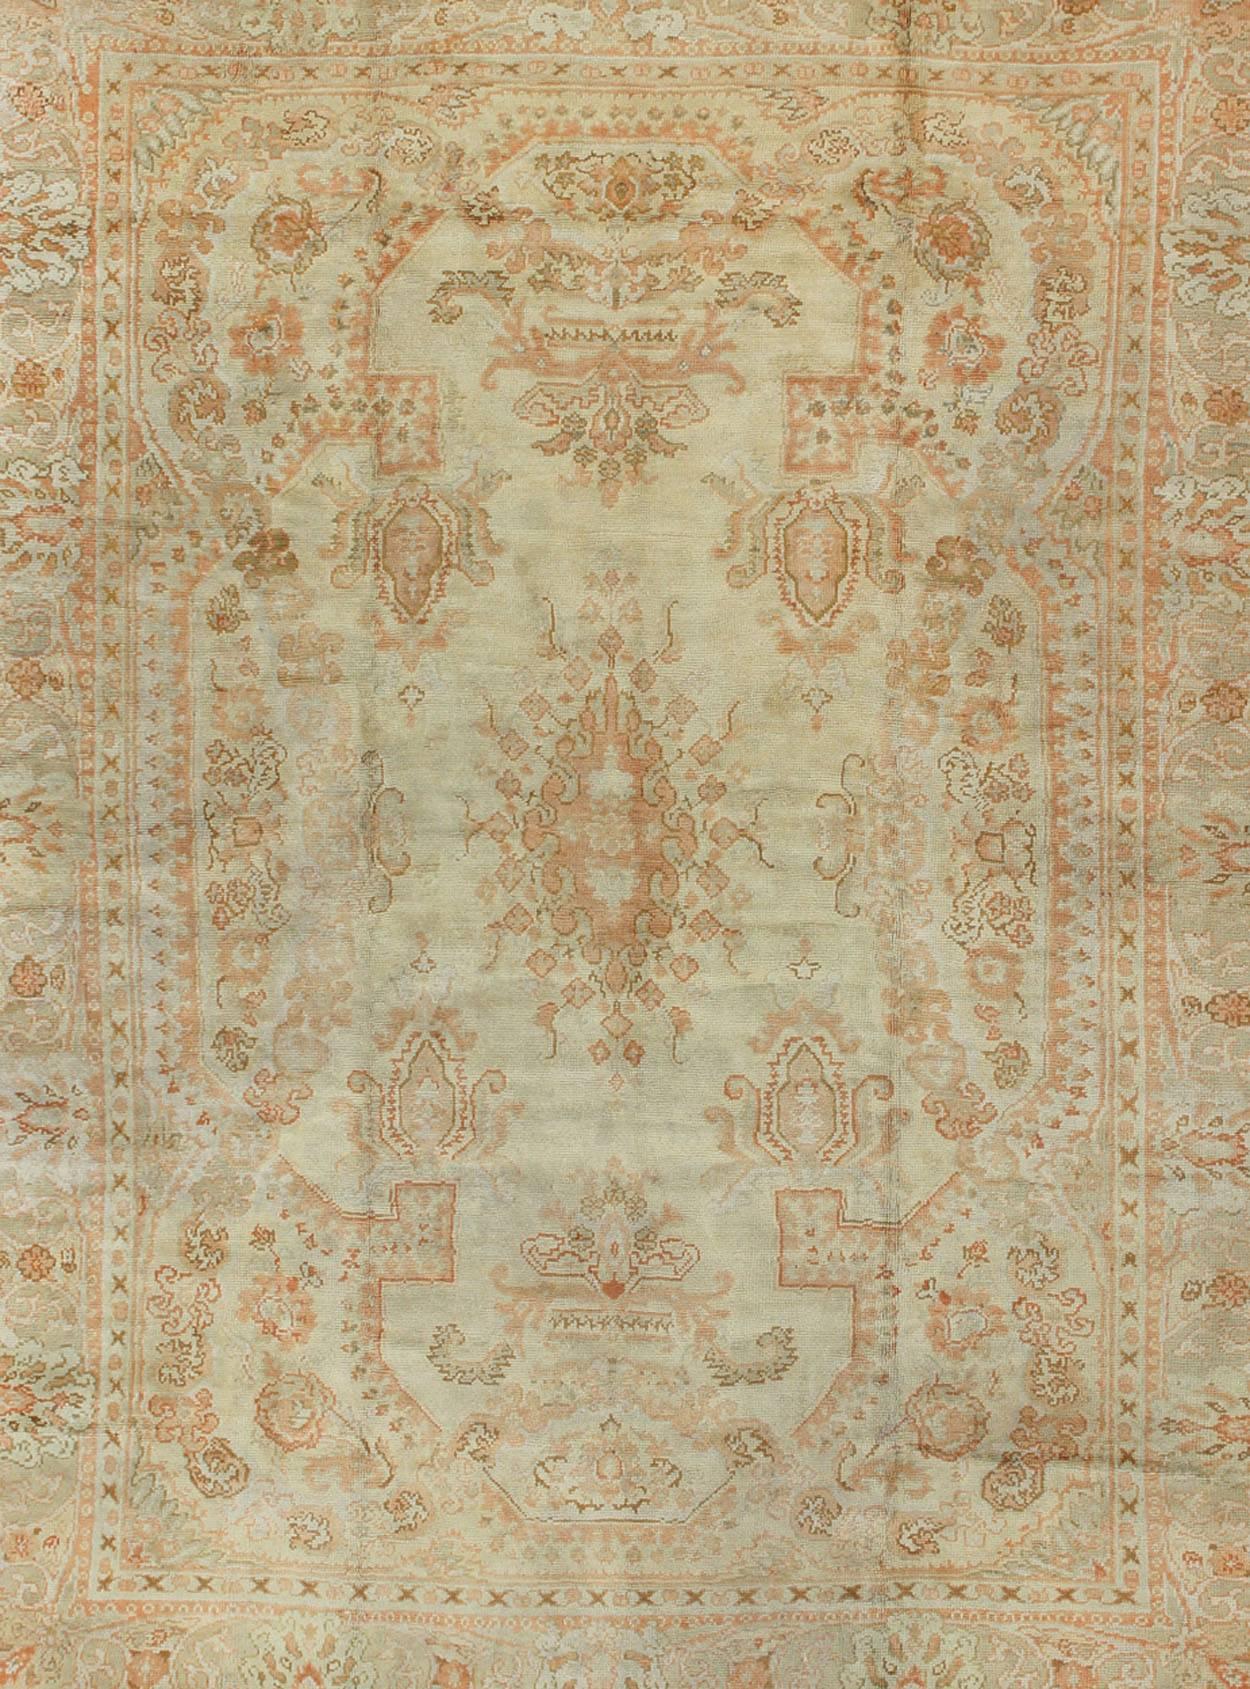 Turkish Large Antique Oushak Carpet in Ivory Background, Taupe, Gray , Green and Salmon